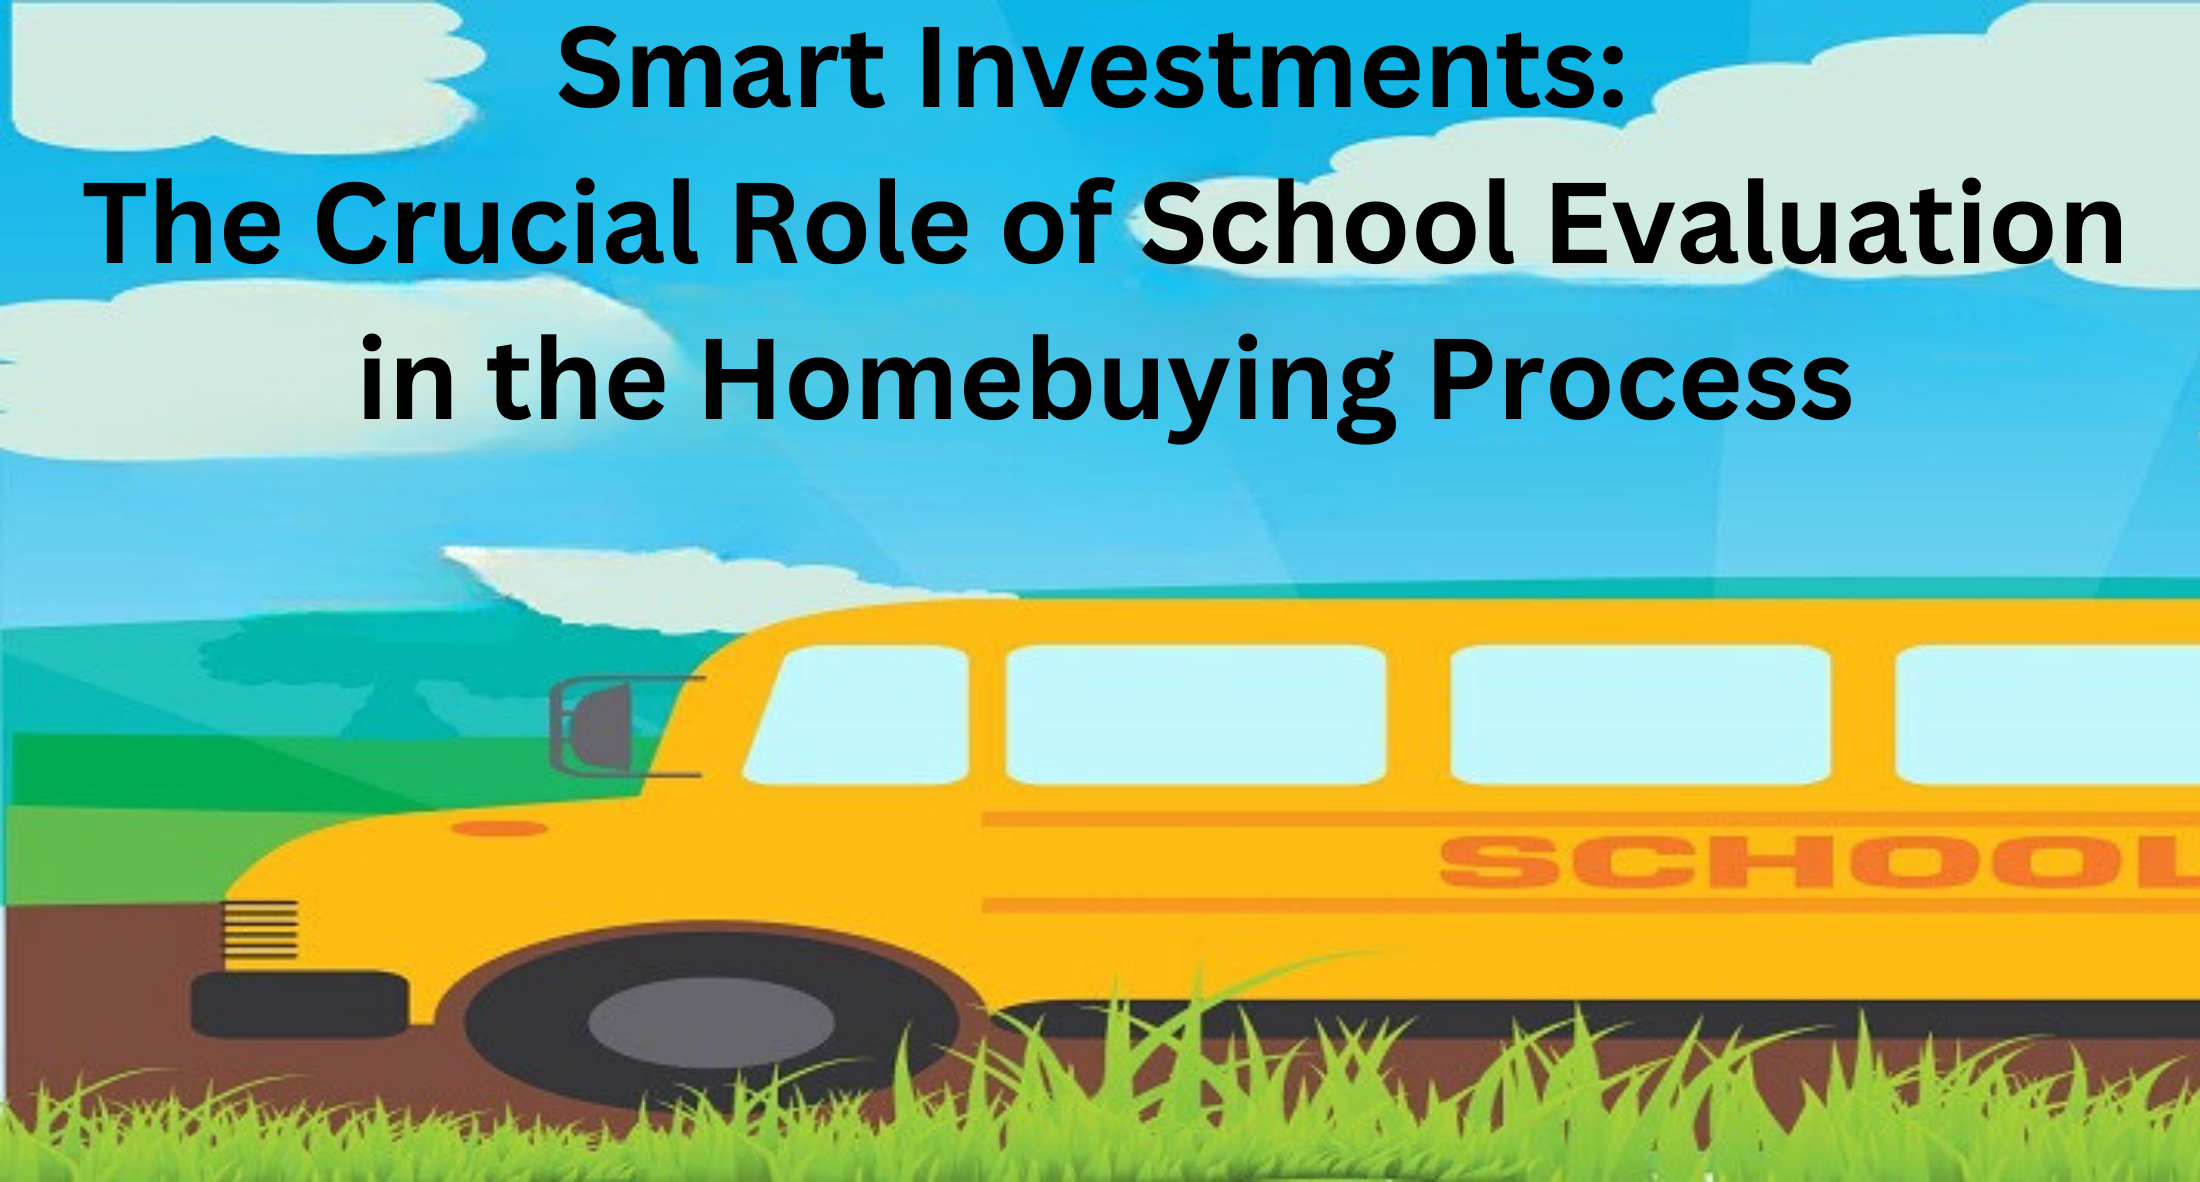 Researching schools is part of the homebuying process.